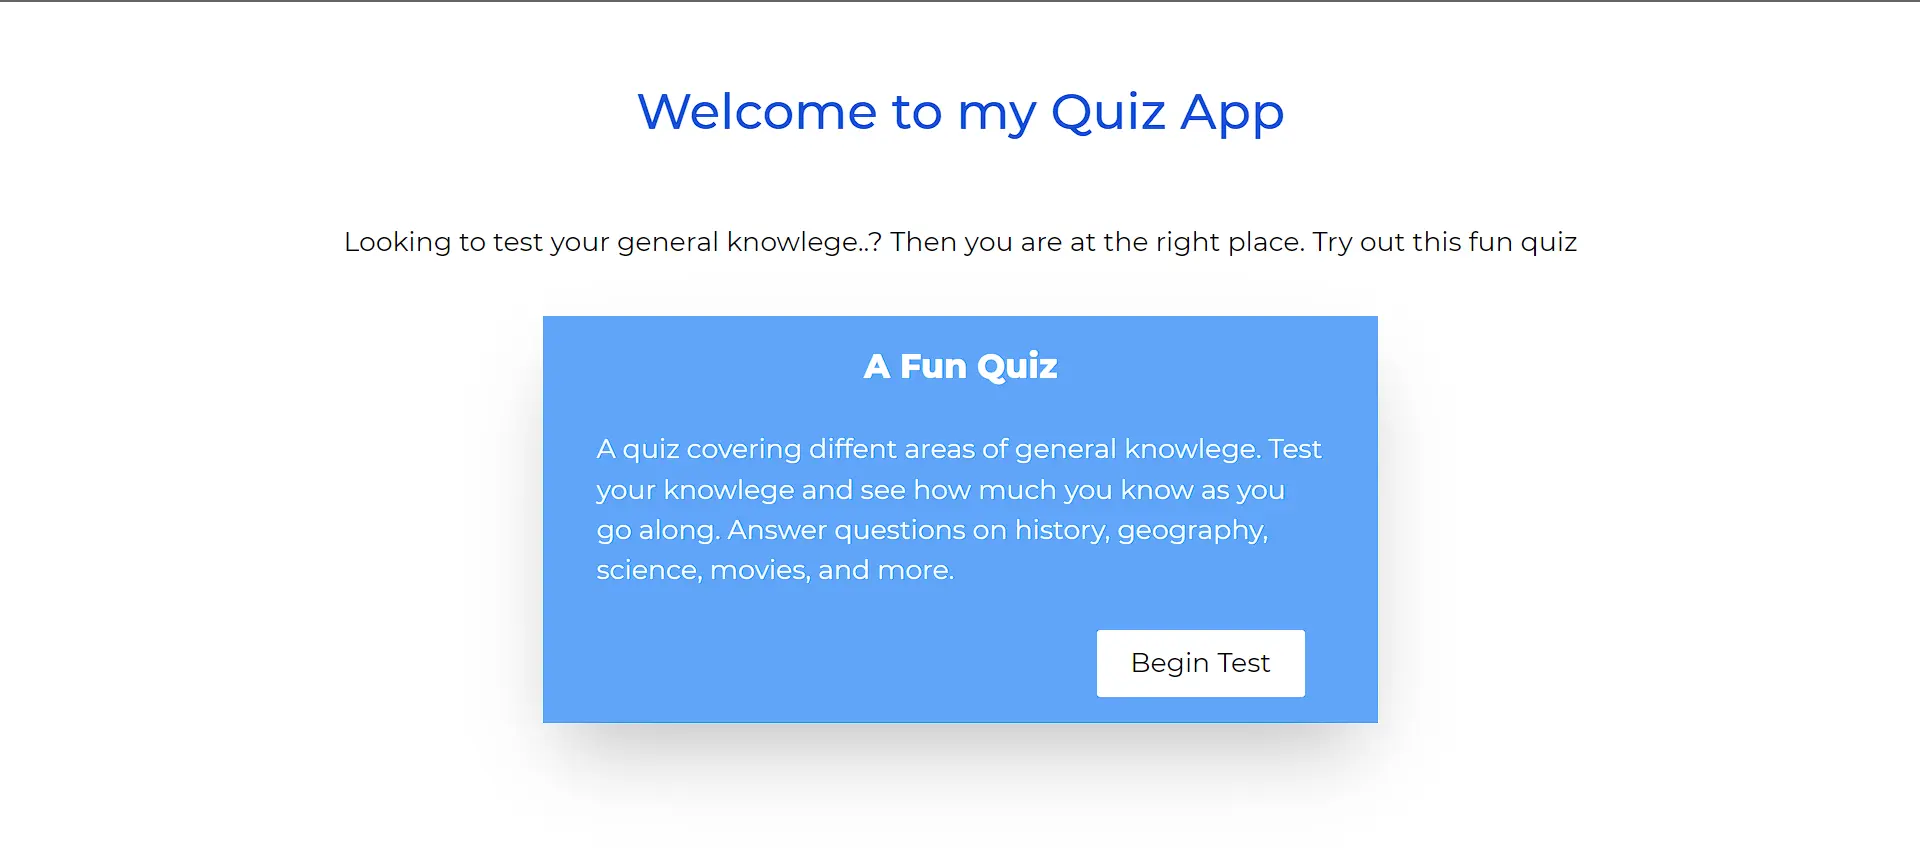 Rendered quiz app welcome page